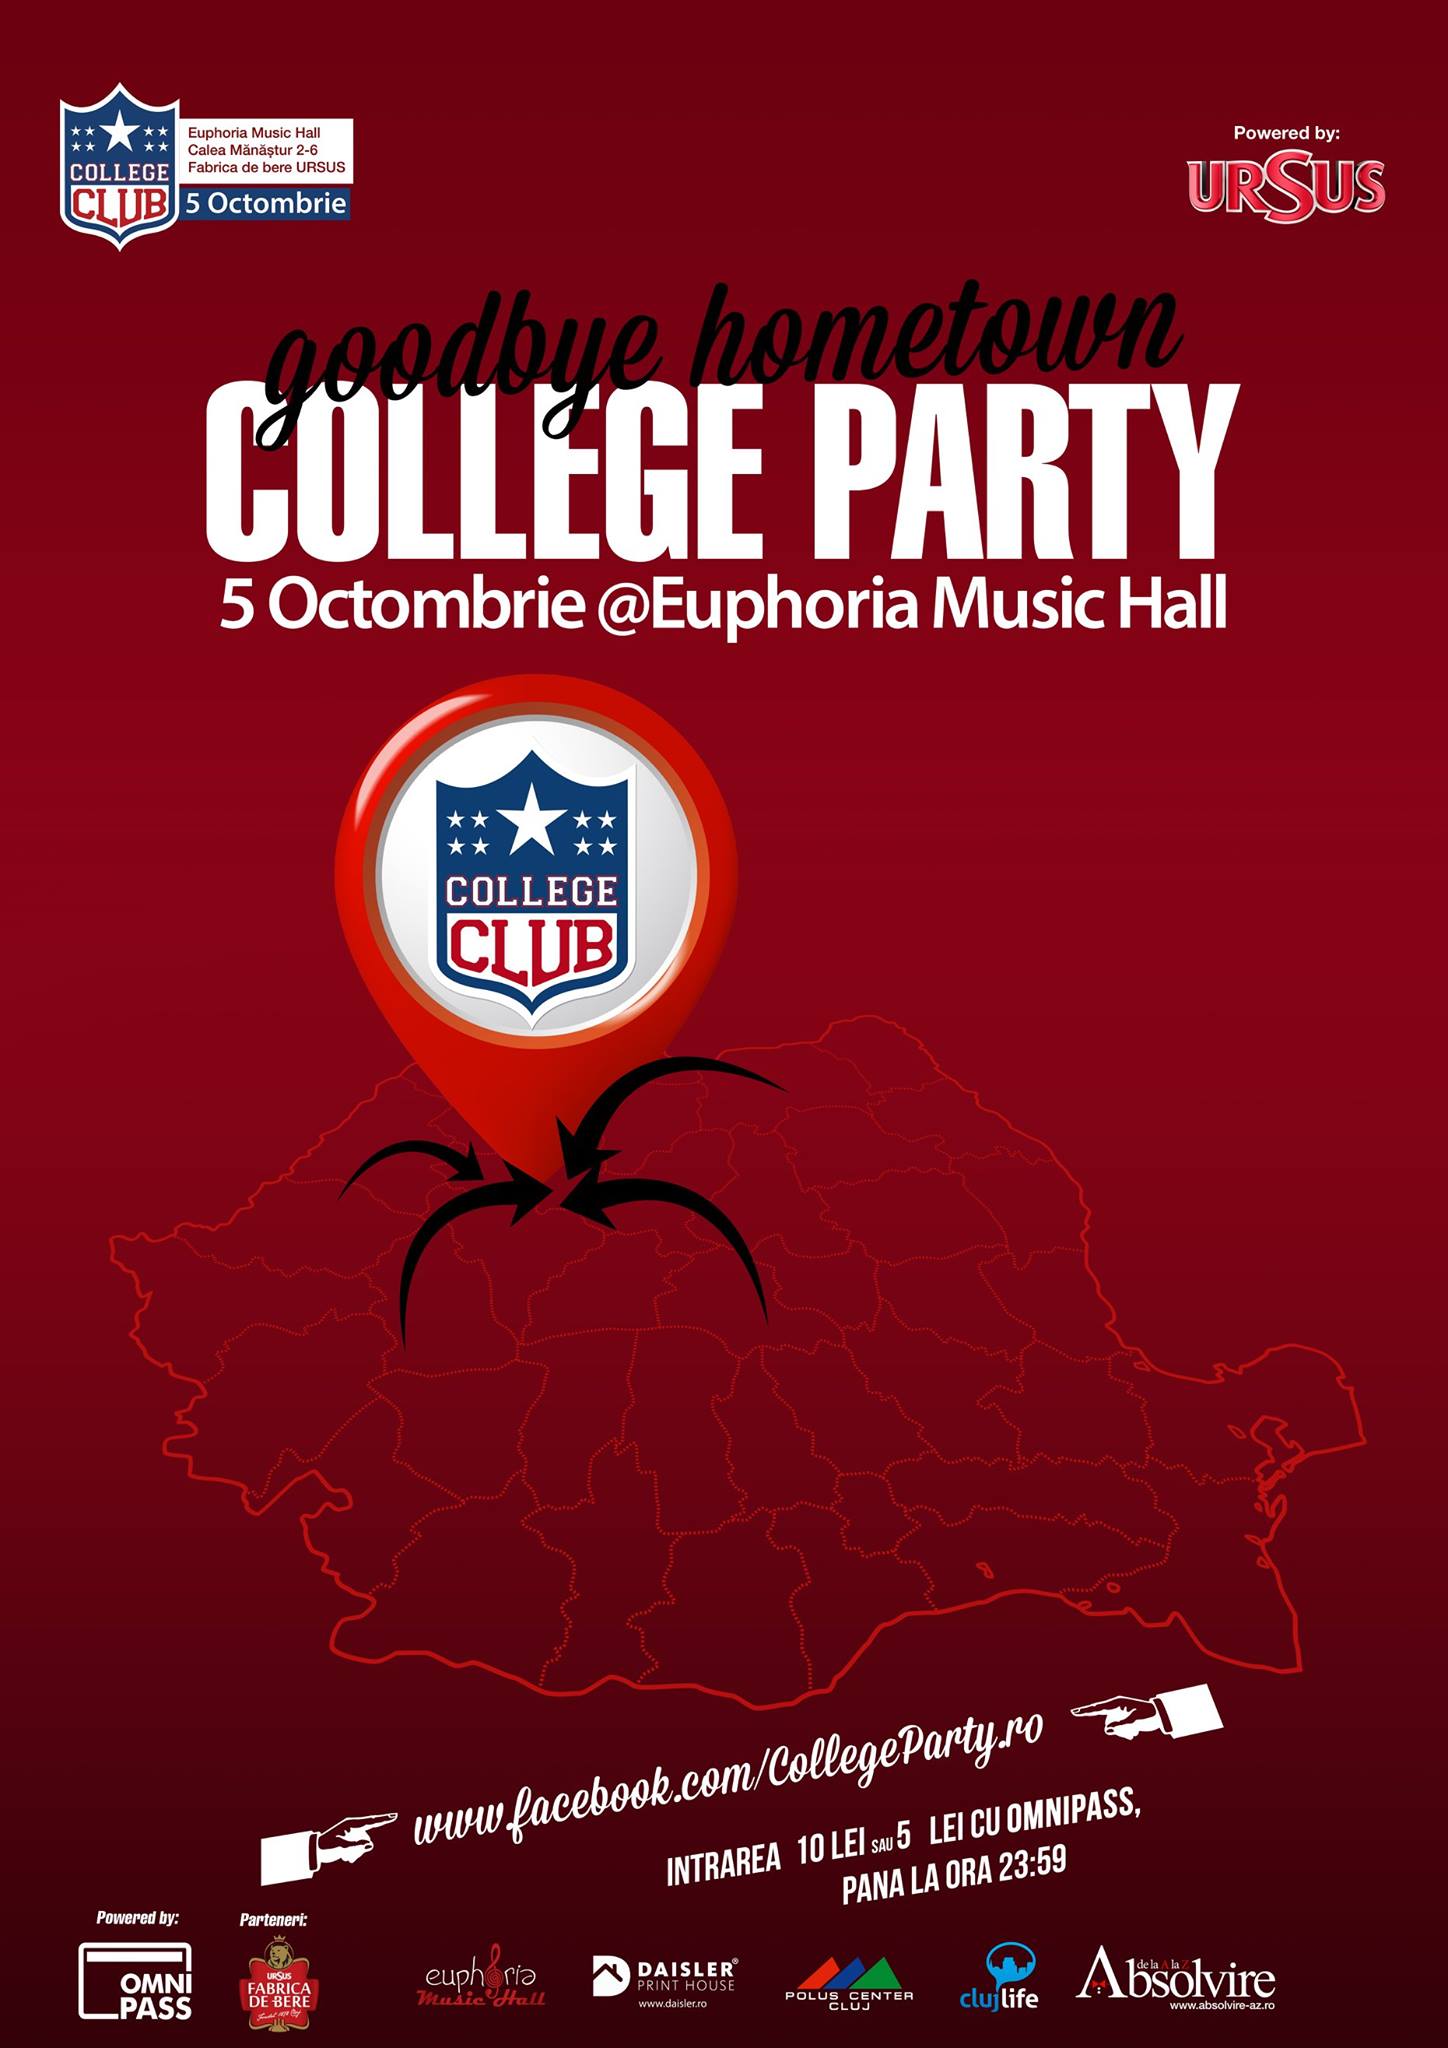 College Party – Goodbye Hometown